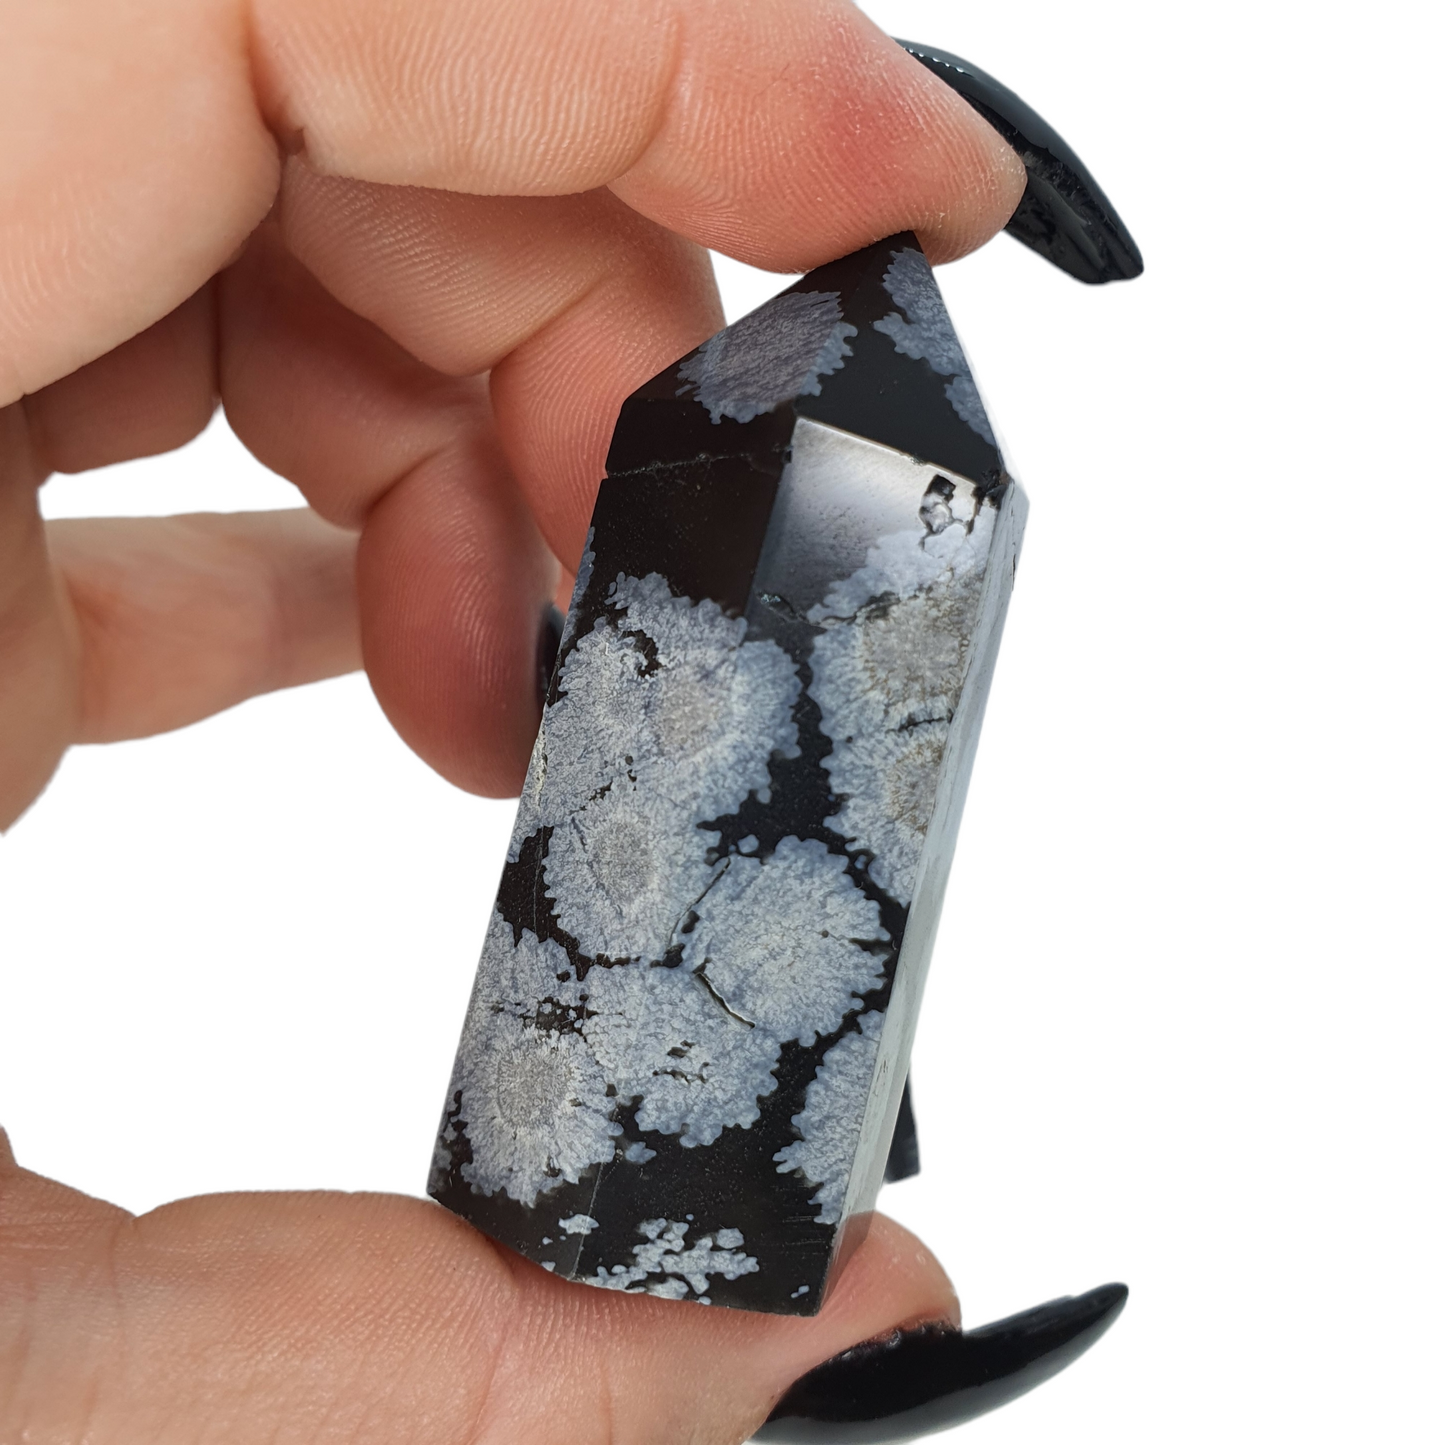 Crystals - Obsidian (Snowflake - High White) Generators/Points